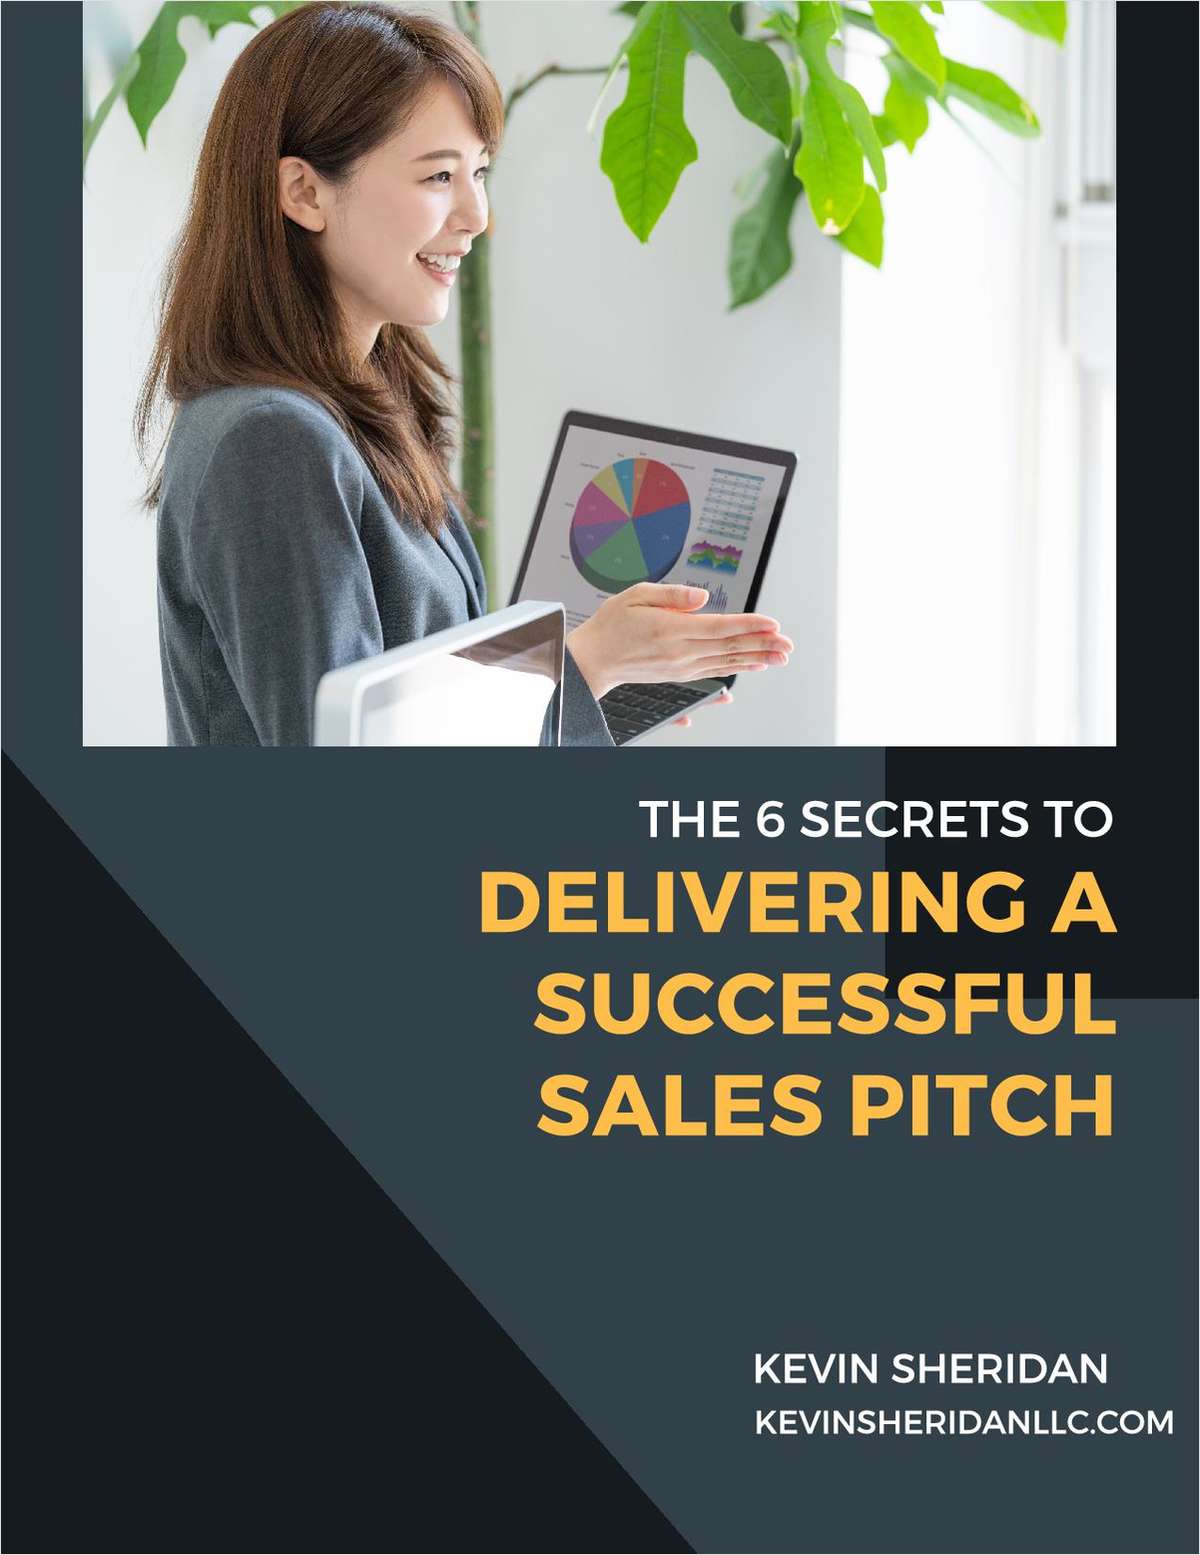 The 6 Secrets to Delivering a Successful Sales Pitch